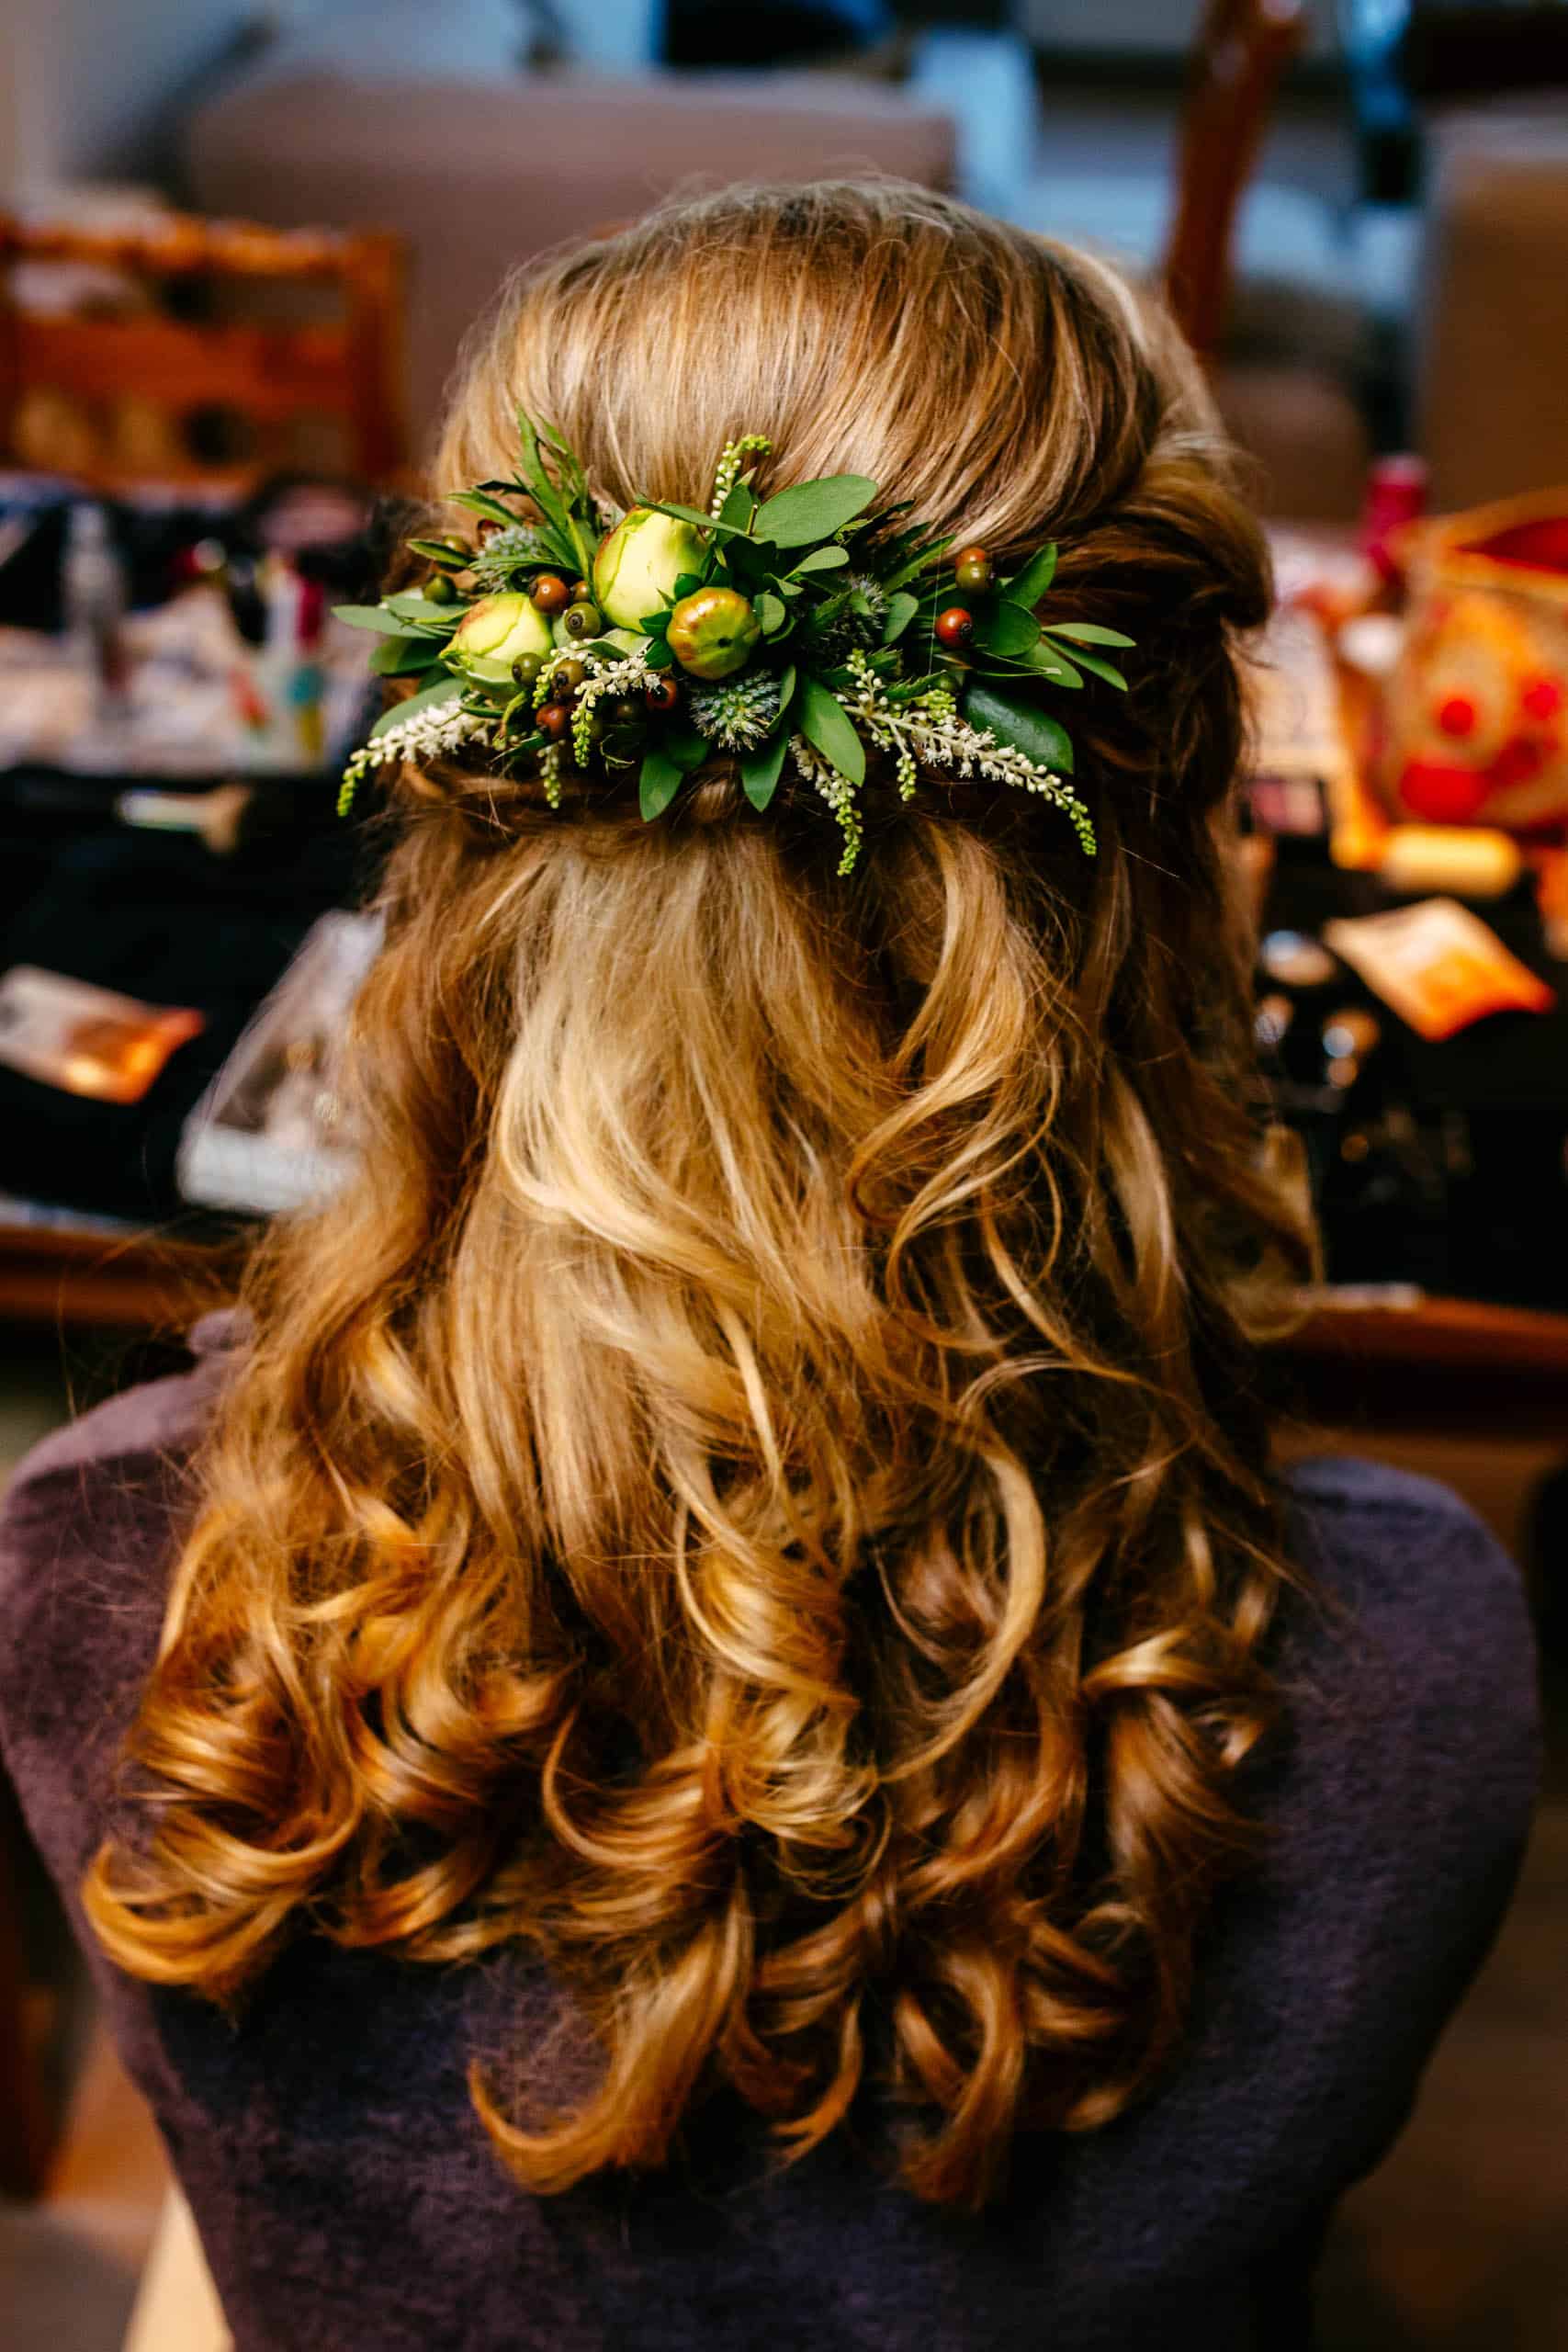 A woman's hair adorned with beautiful bridal hairstyles and flowers.